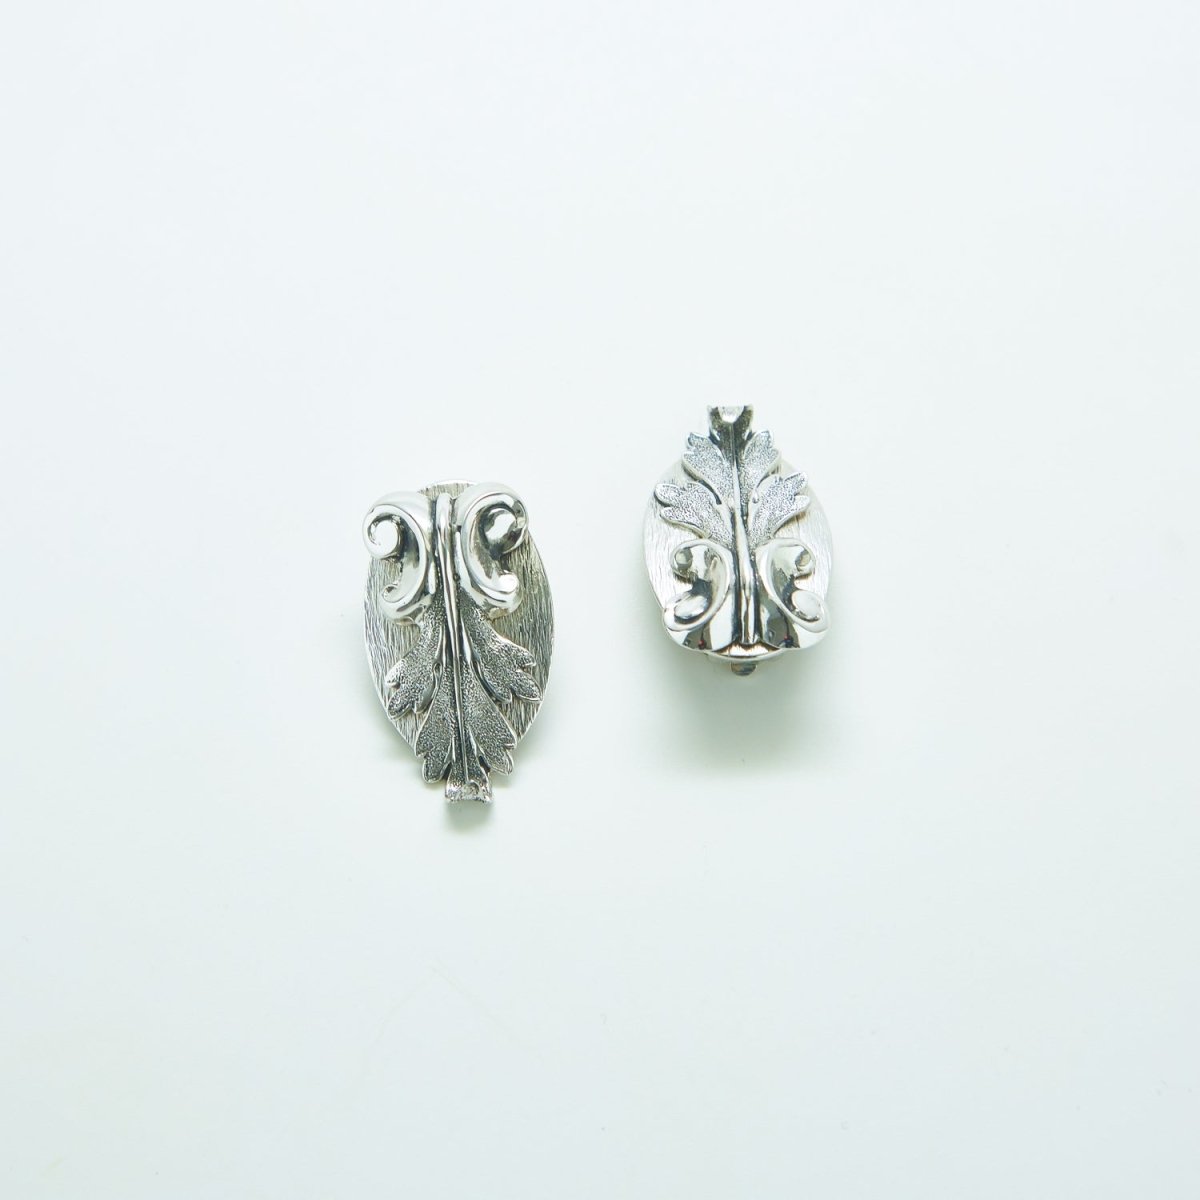 Vintage Whiting & Davis Silver Leaf Embellishment Earrings - Admiral Row